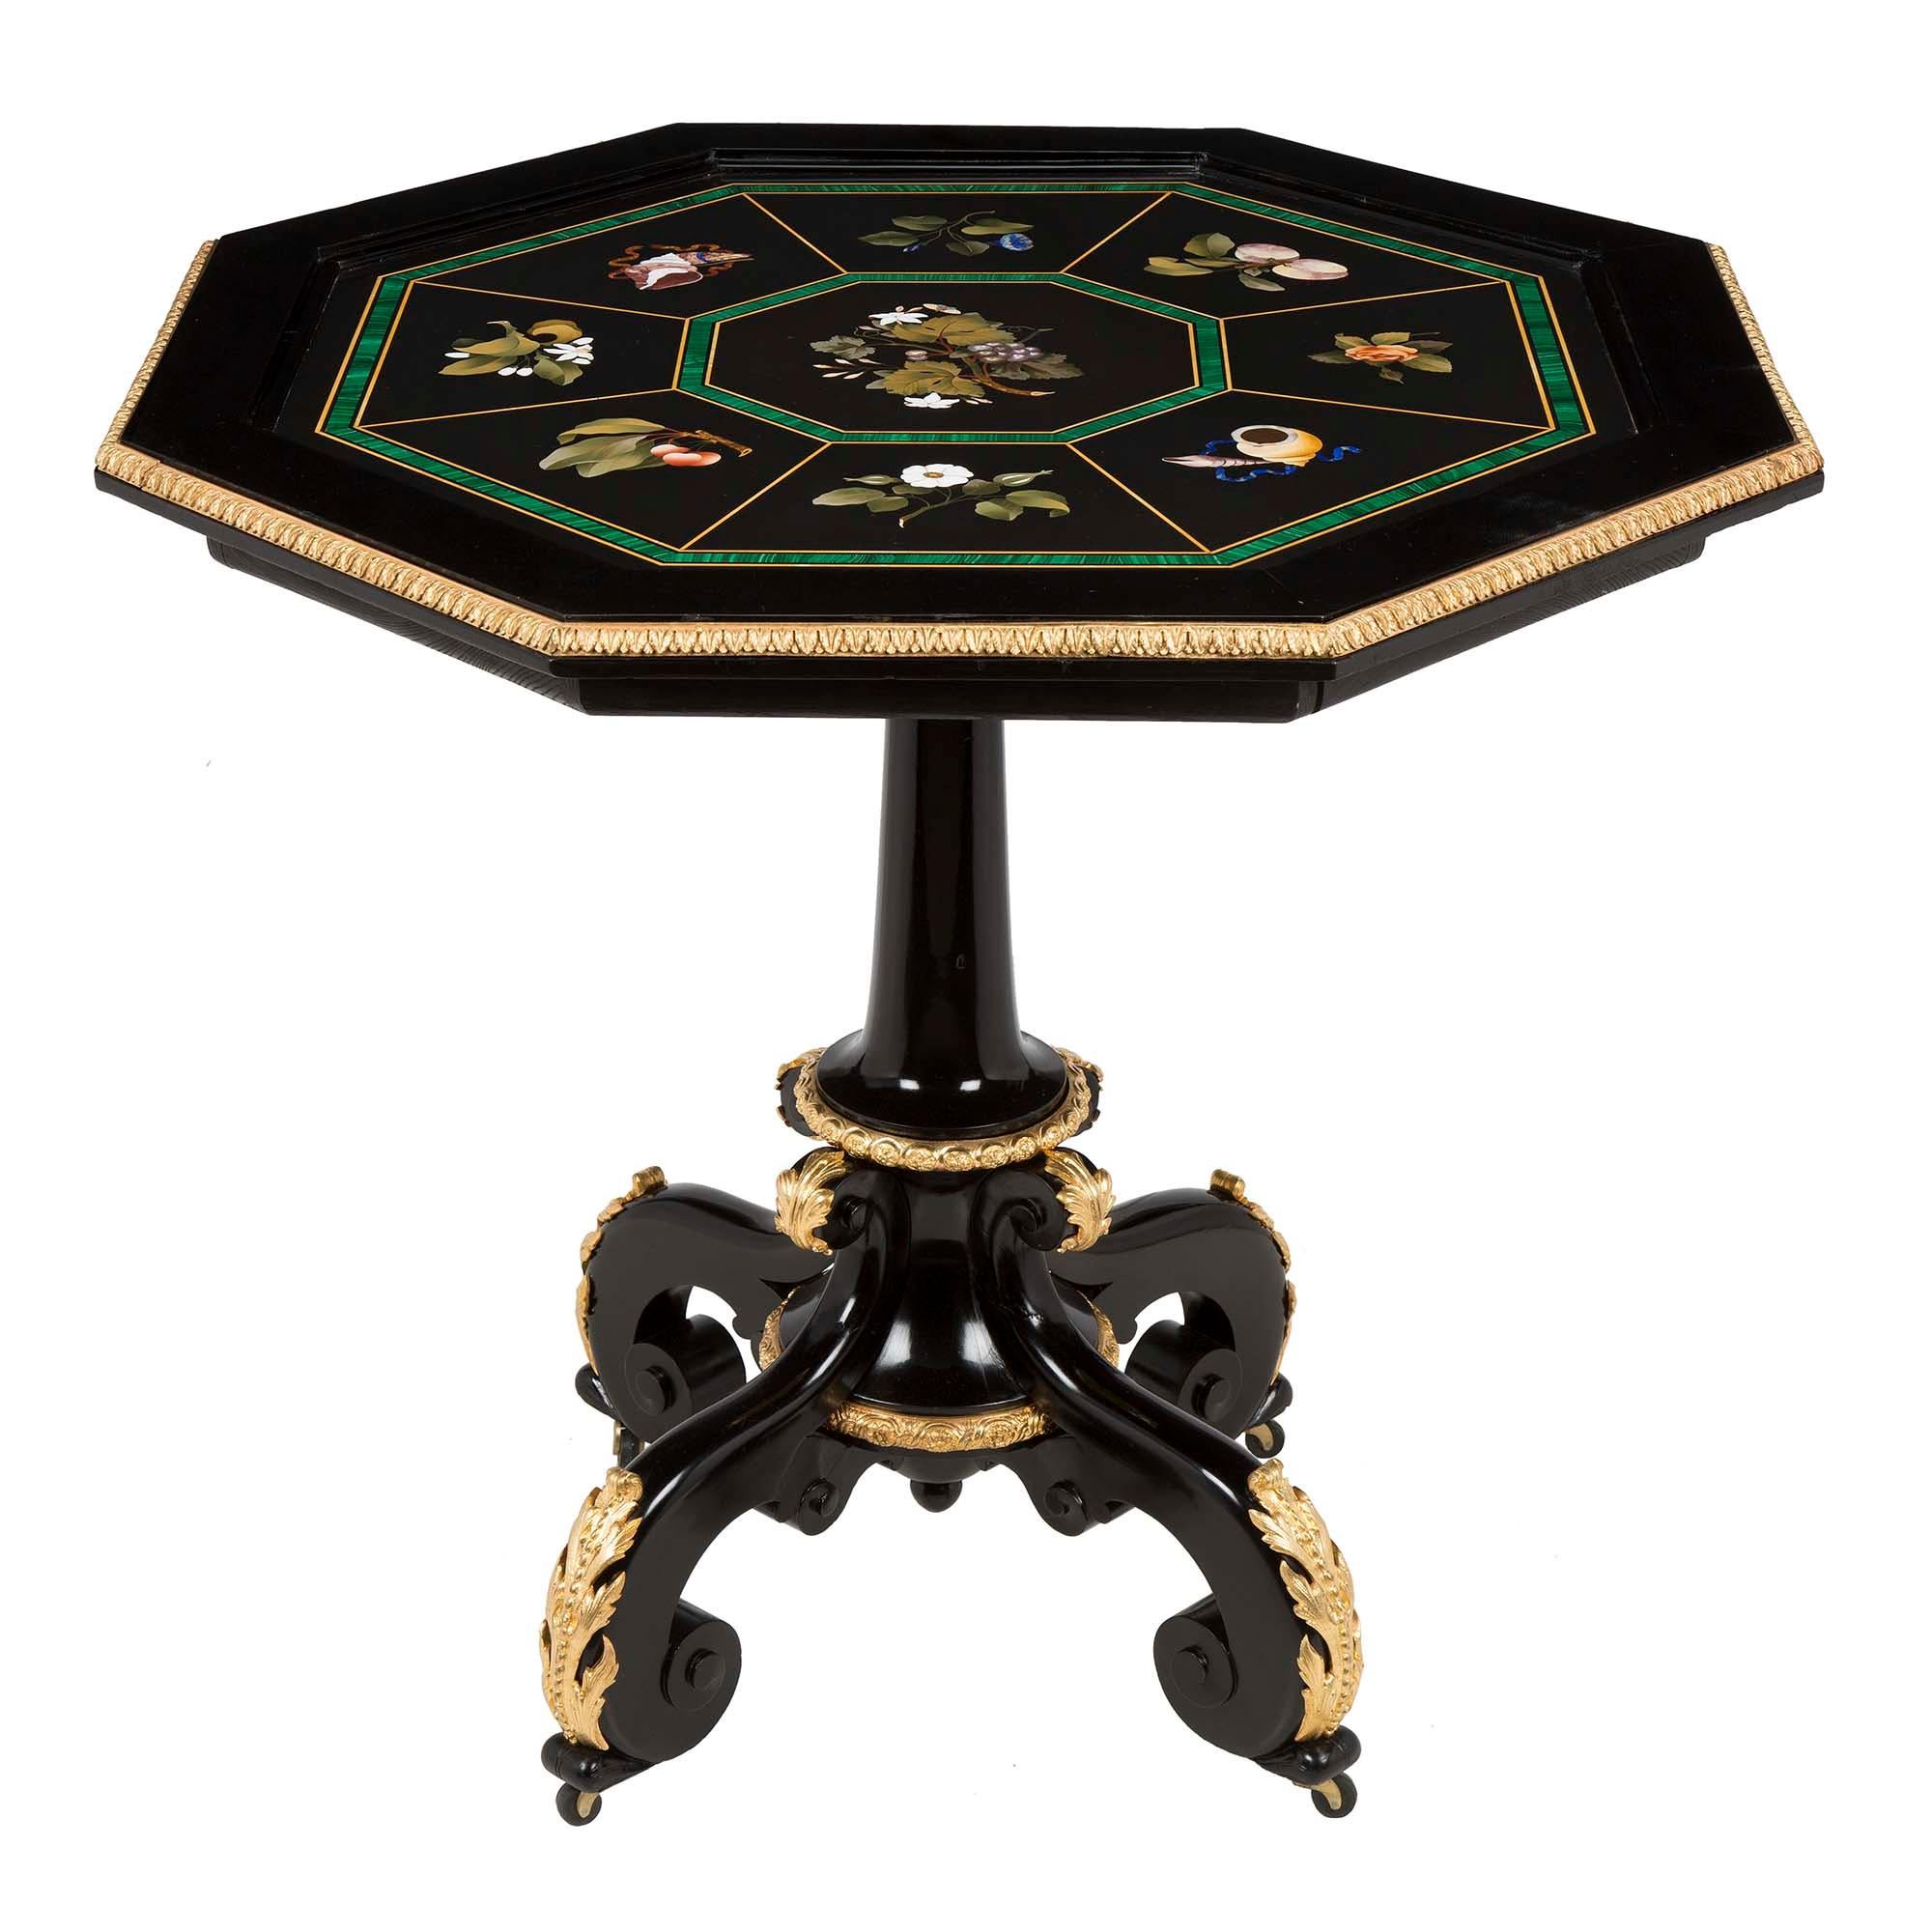 A stunning Italian 19th century Napoleon III Period ebony, marble and ormolu Florentine side table. Raised on scrolled ebony feet with casters, decorated with finely chased acanthus leaf mounts. At the central column support is an inverted finial,